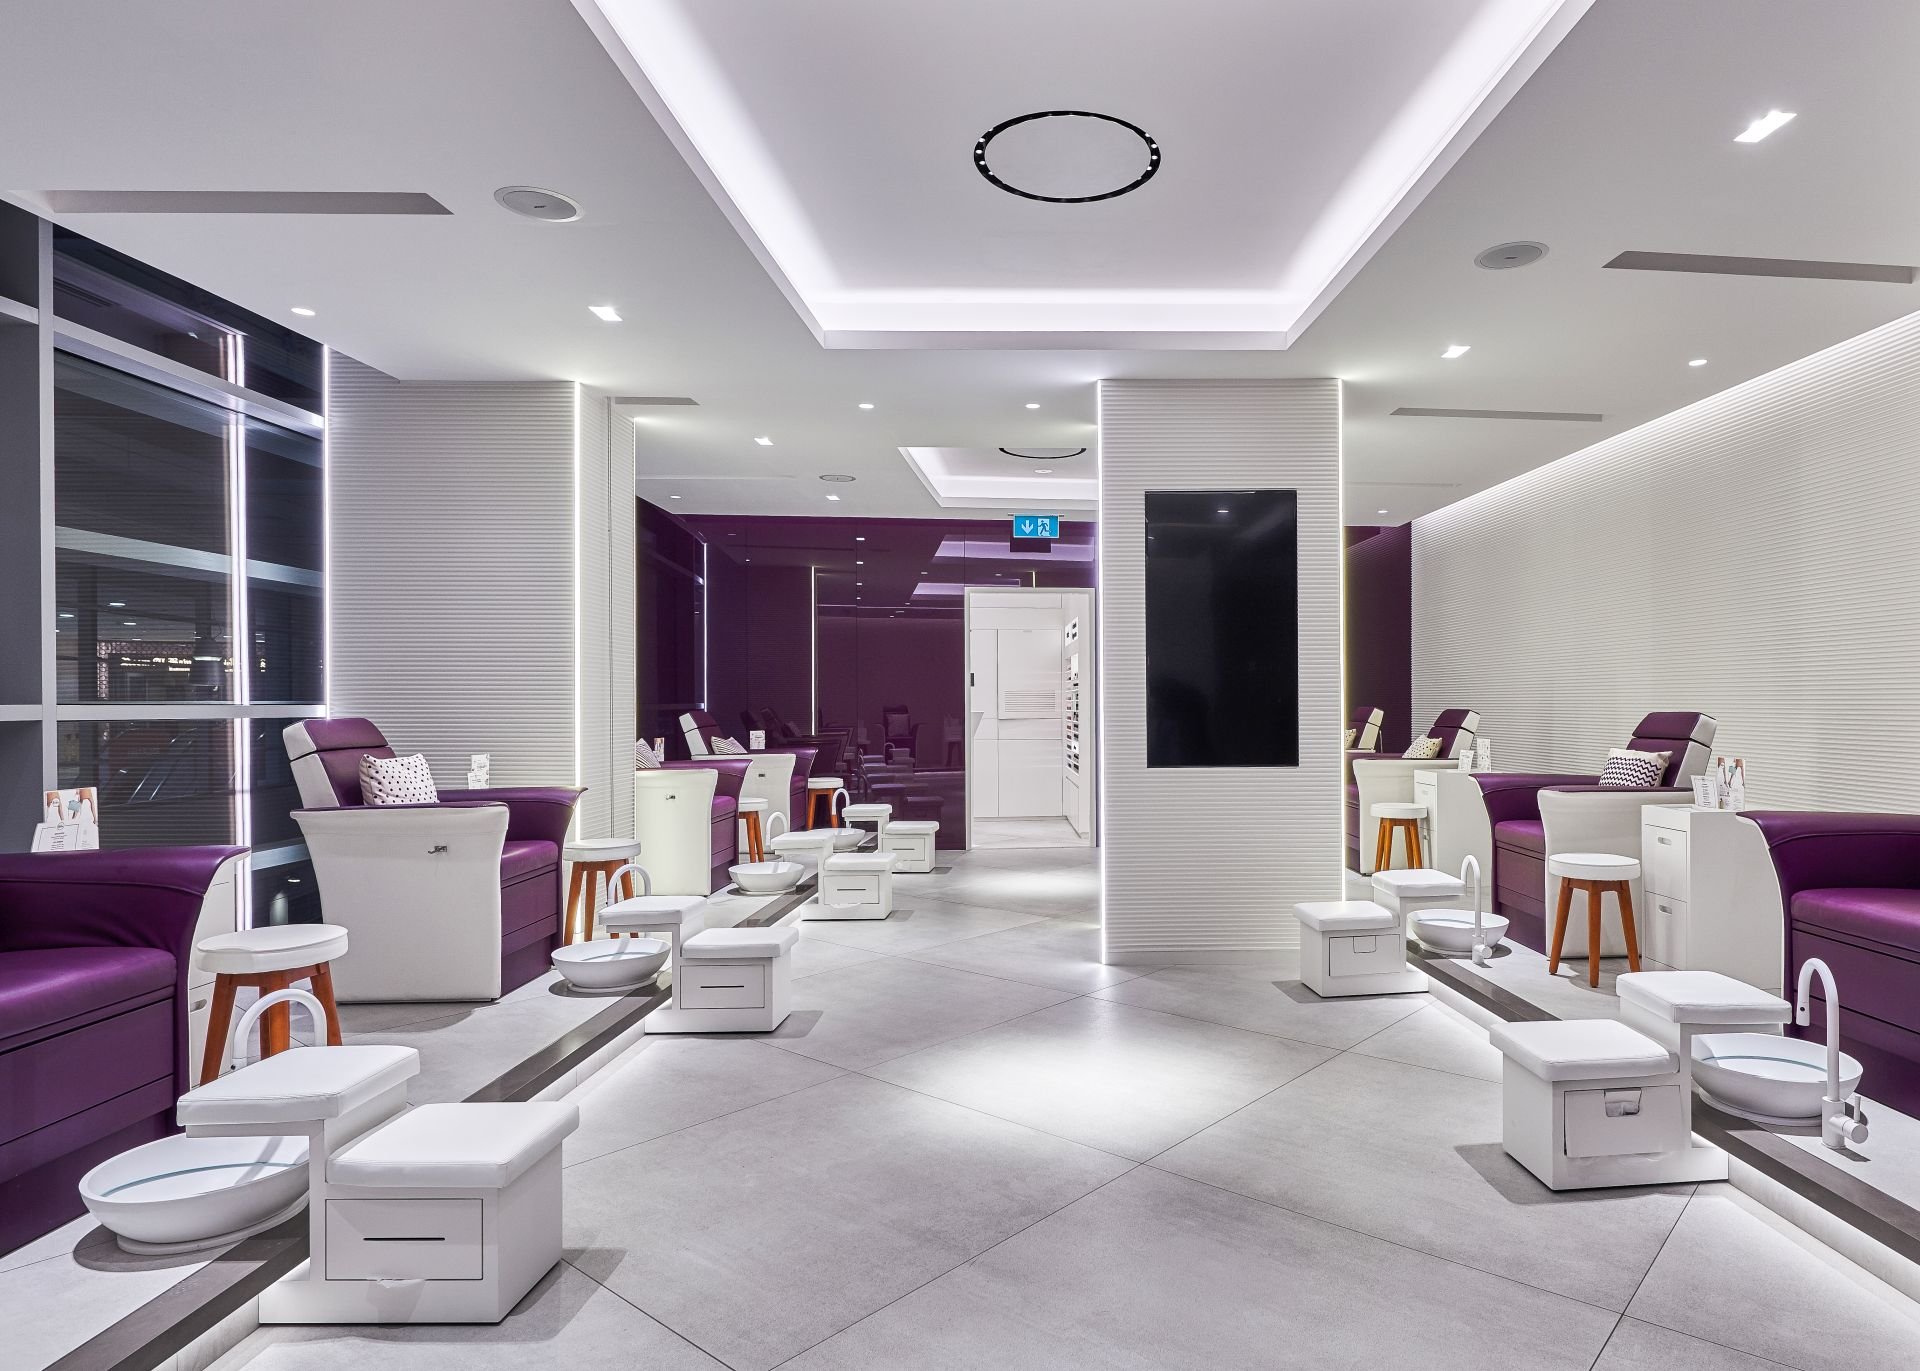 The Nail Spa in the UAE | Havelock One Interiors Fit-out Project